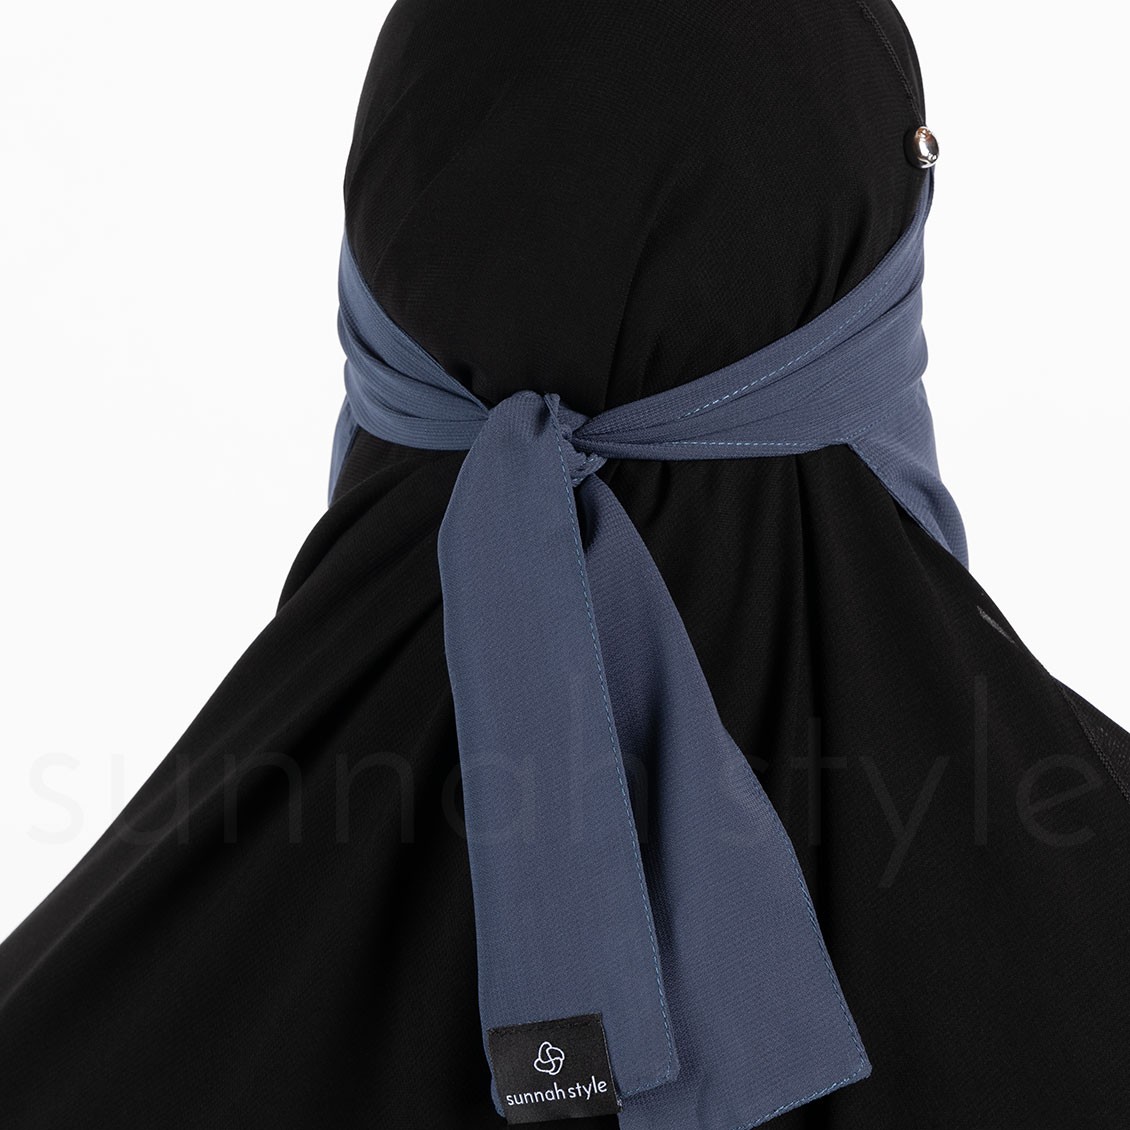 Sunnah Style One Layer One Piece Niqab Steel Blue